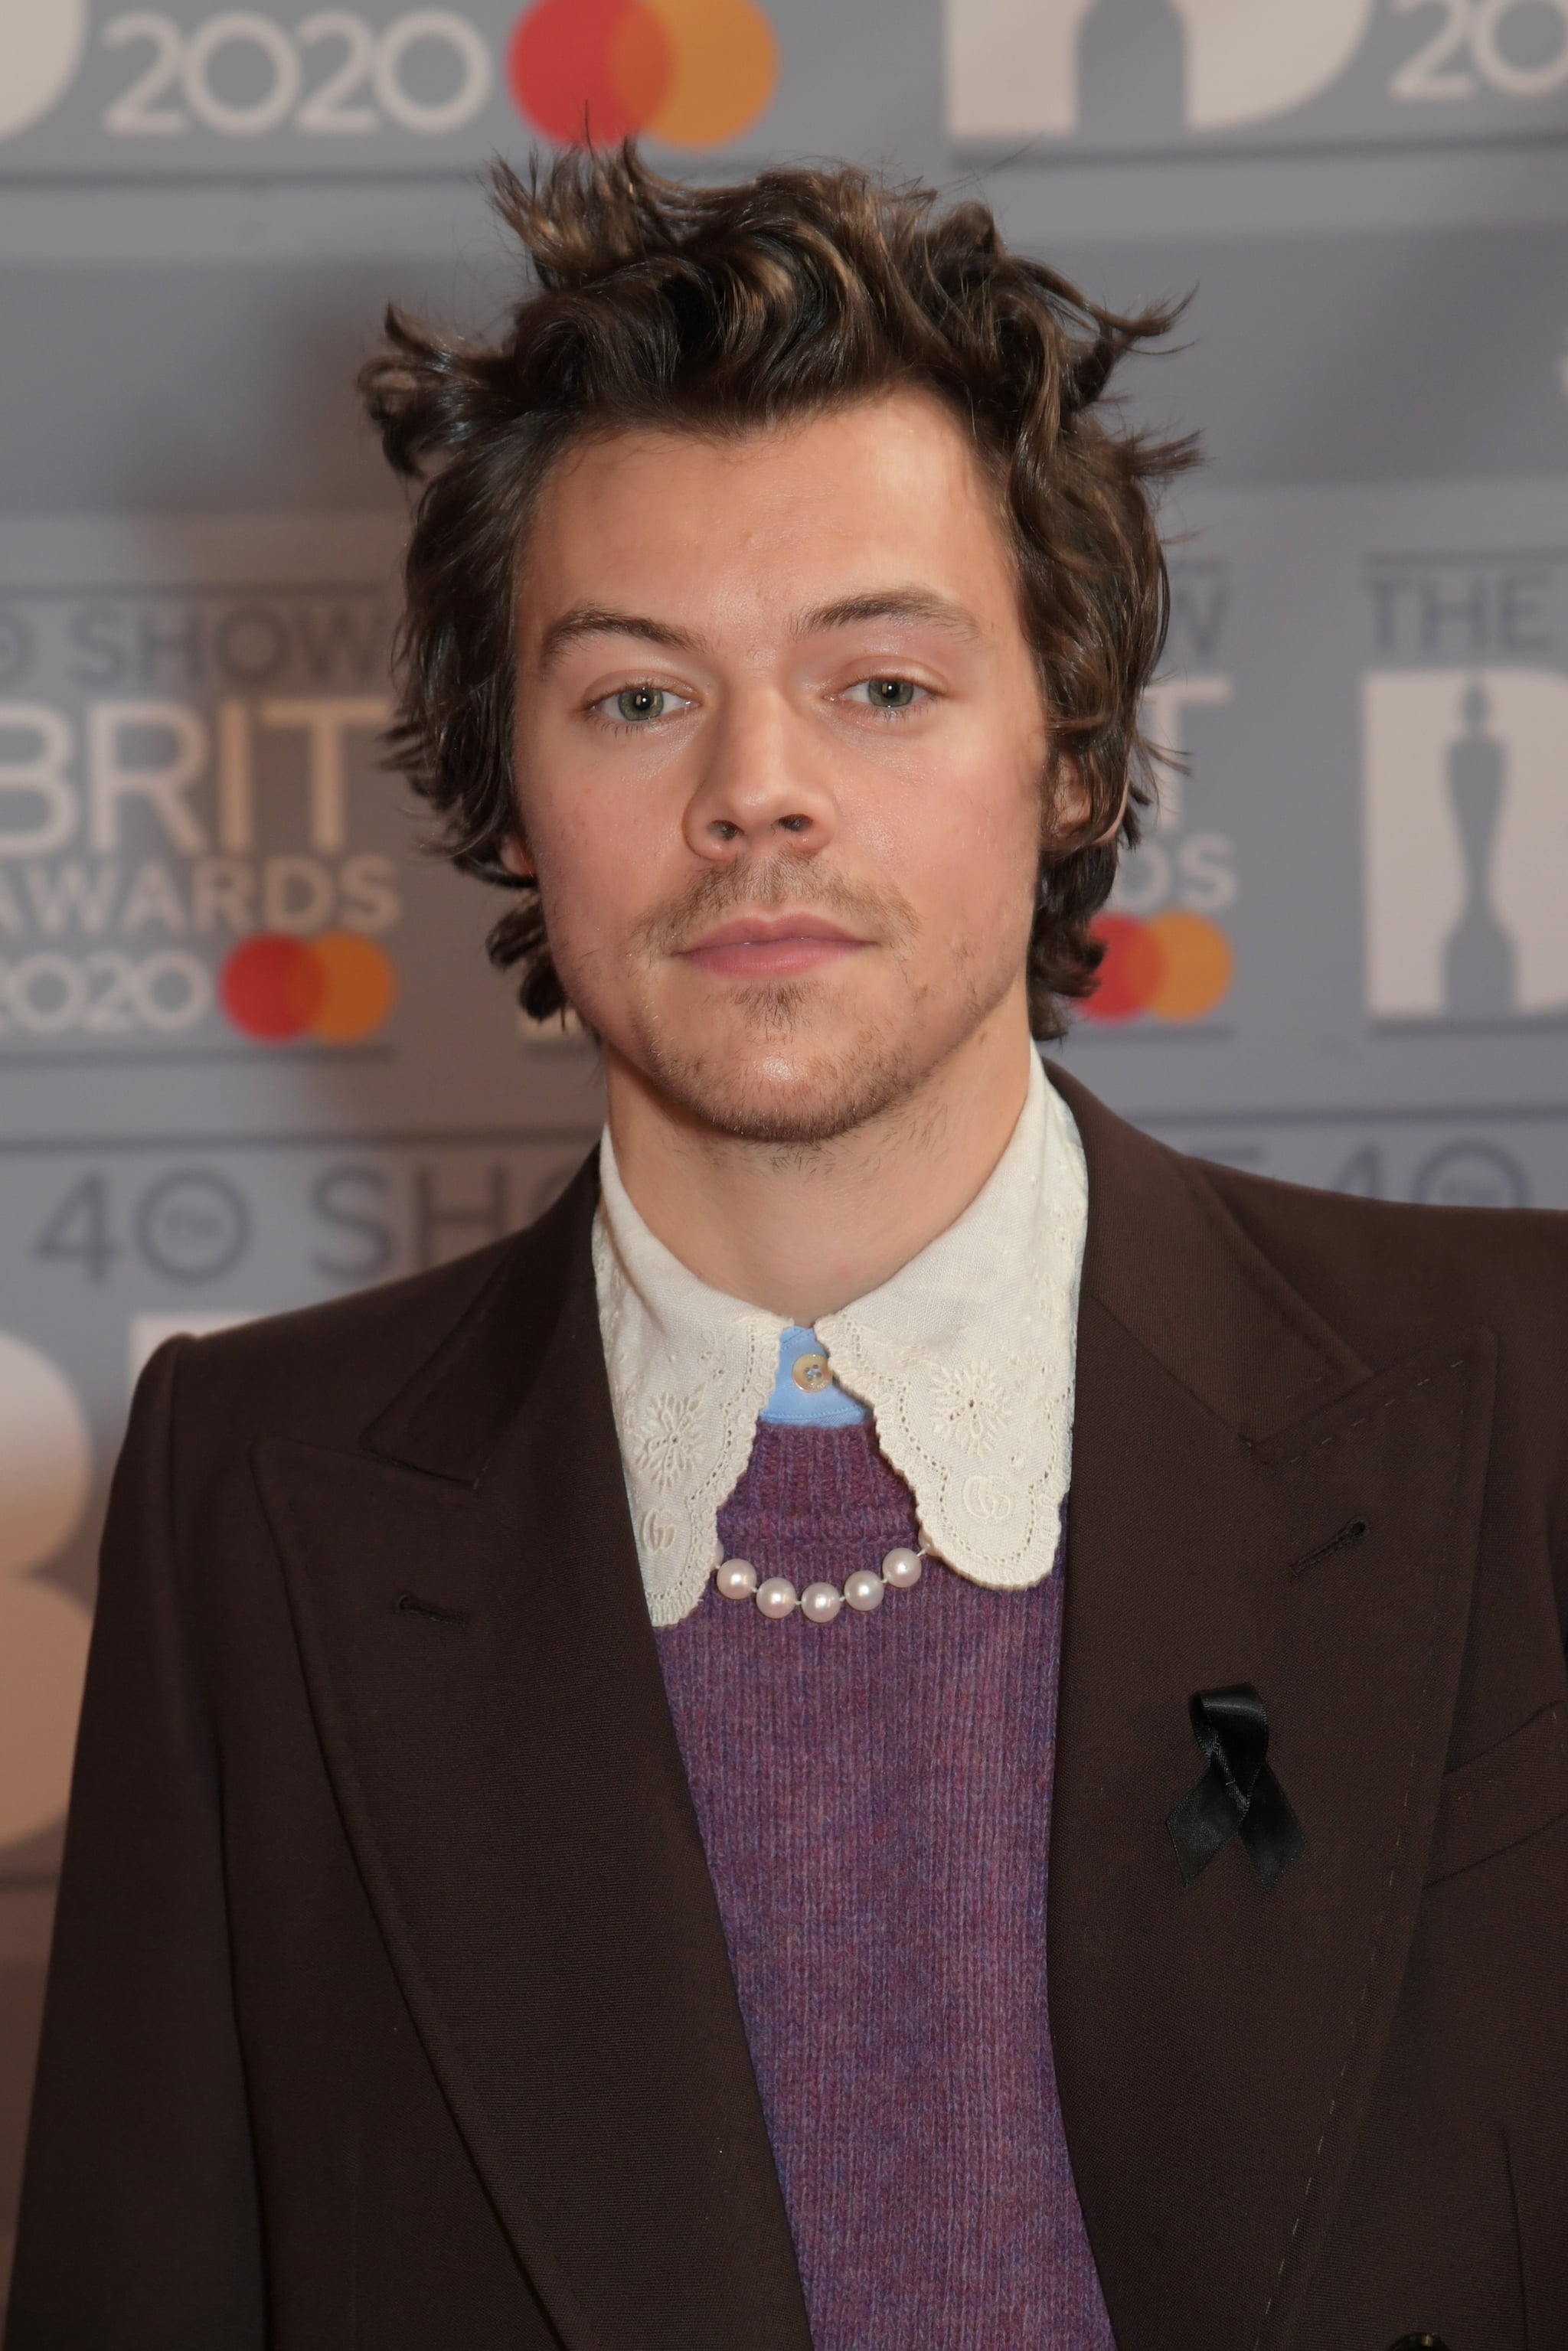 Harry Styles At The Brit Awards In London See All The Stars Who Turned Out For The Brit Awards Popsugar Celebrity Photo 2